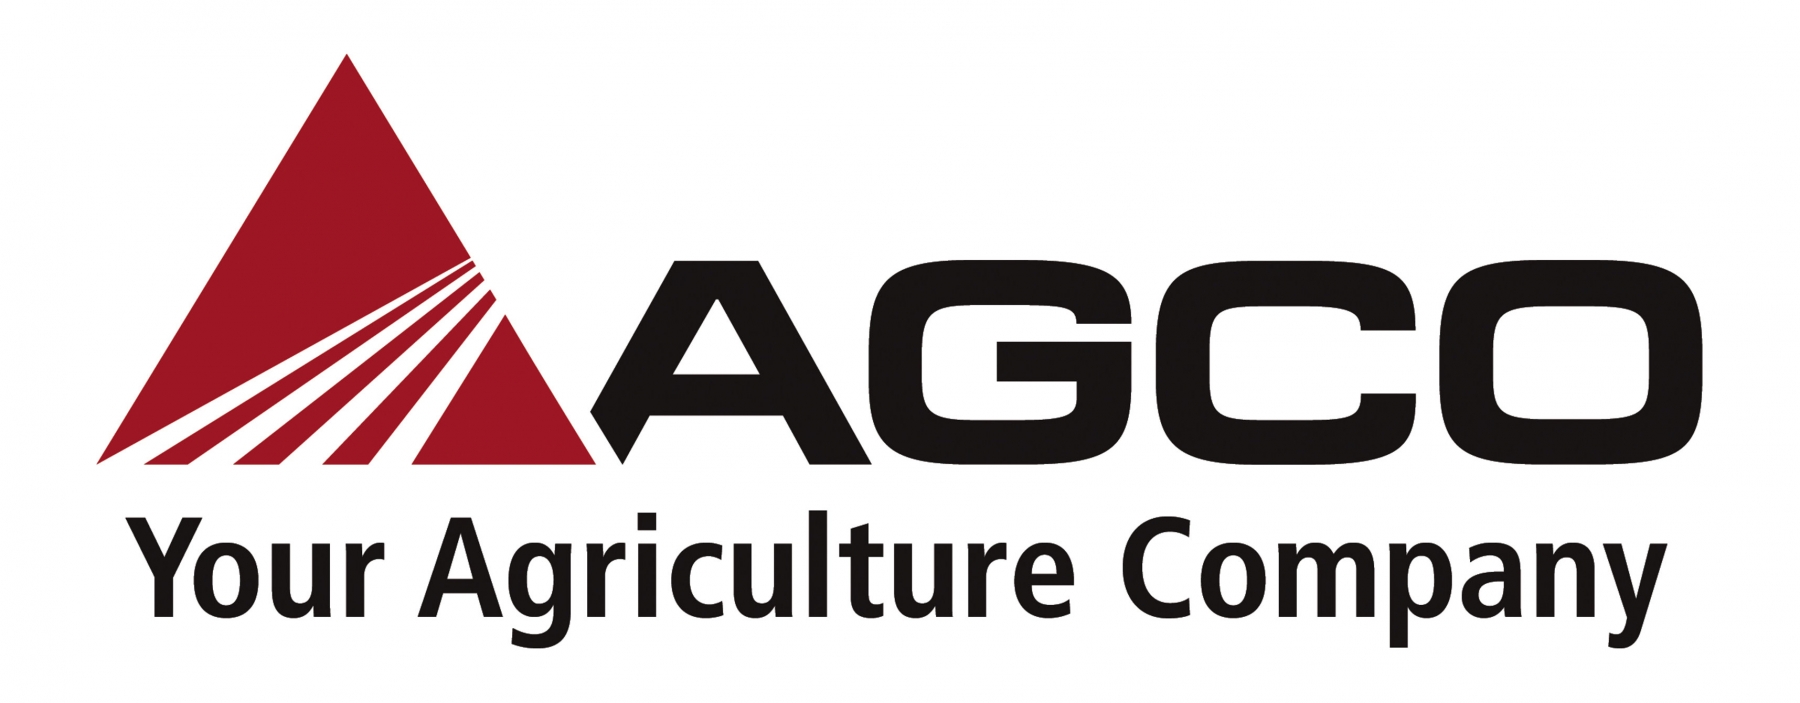 Agco - Agricultural Equipment